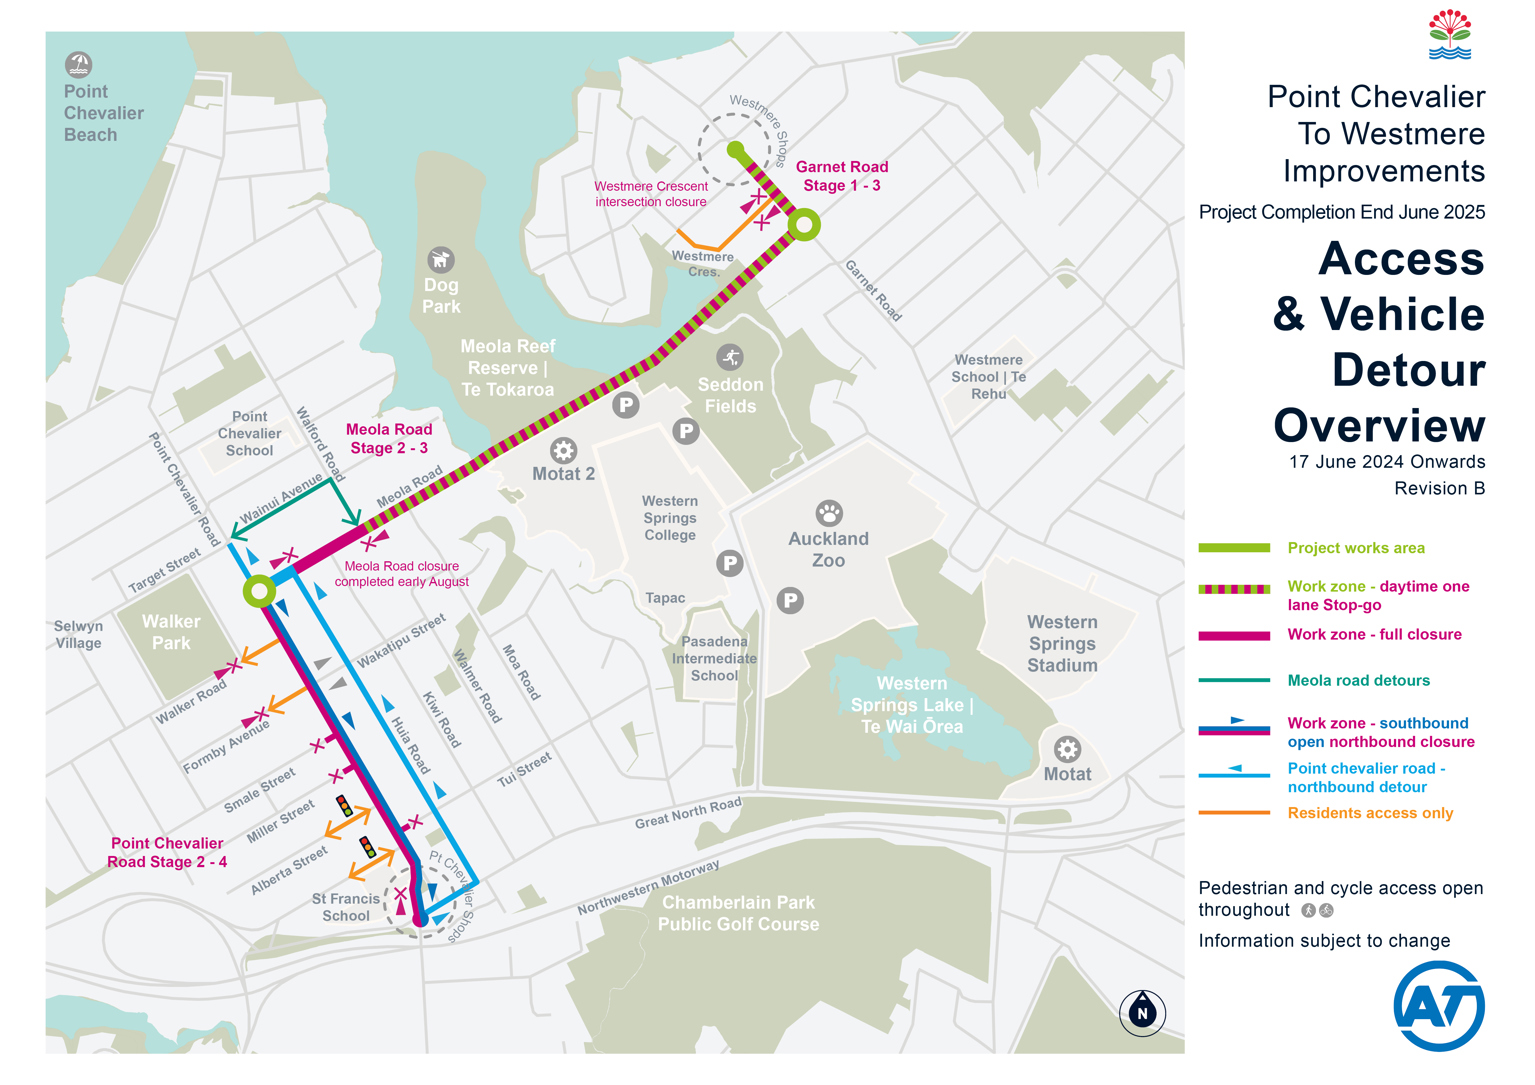 Map showing access and vehicle detours during the Point Chevalier to Westmere improvement work